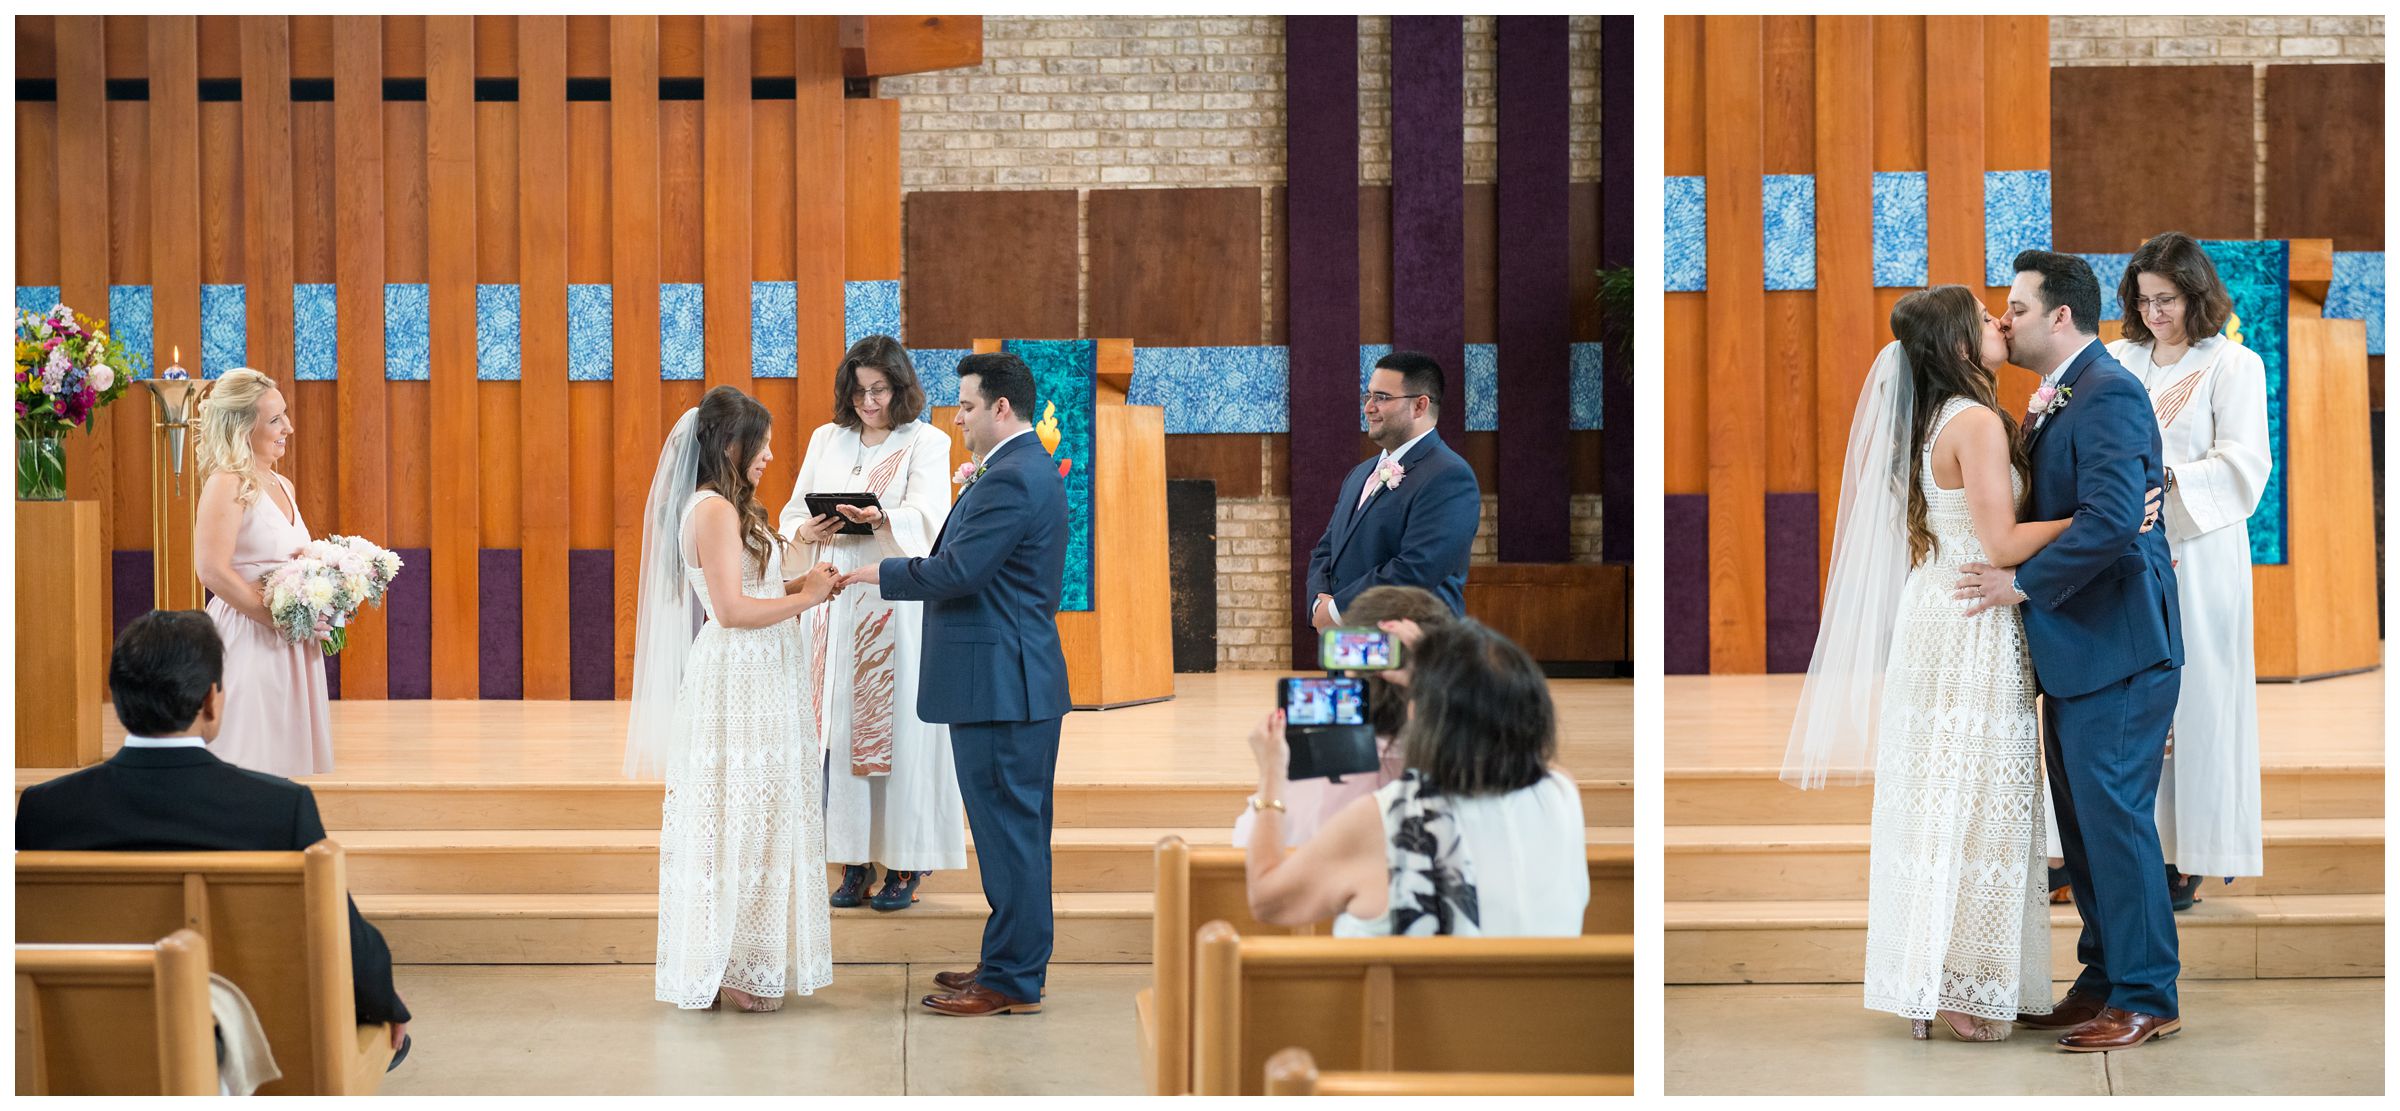 ring exchange and first kiss during wedding ceremony at the Unitarian Universalist Church in Arlington, Virginia 